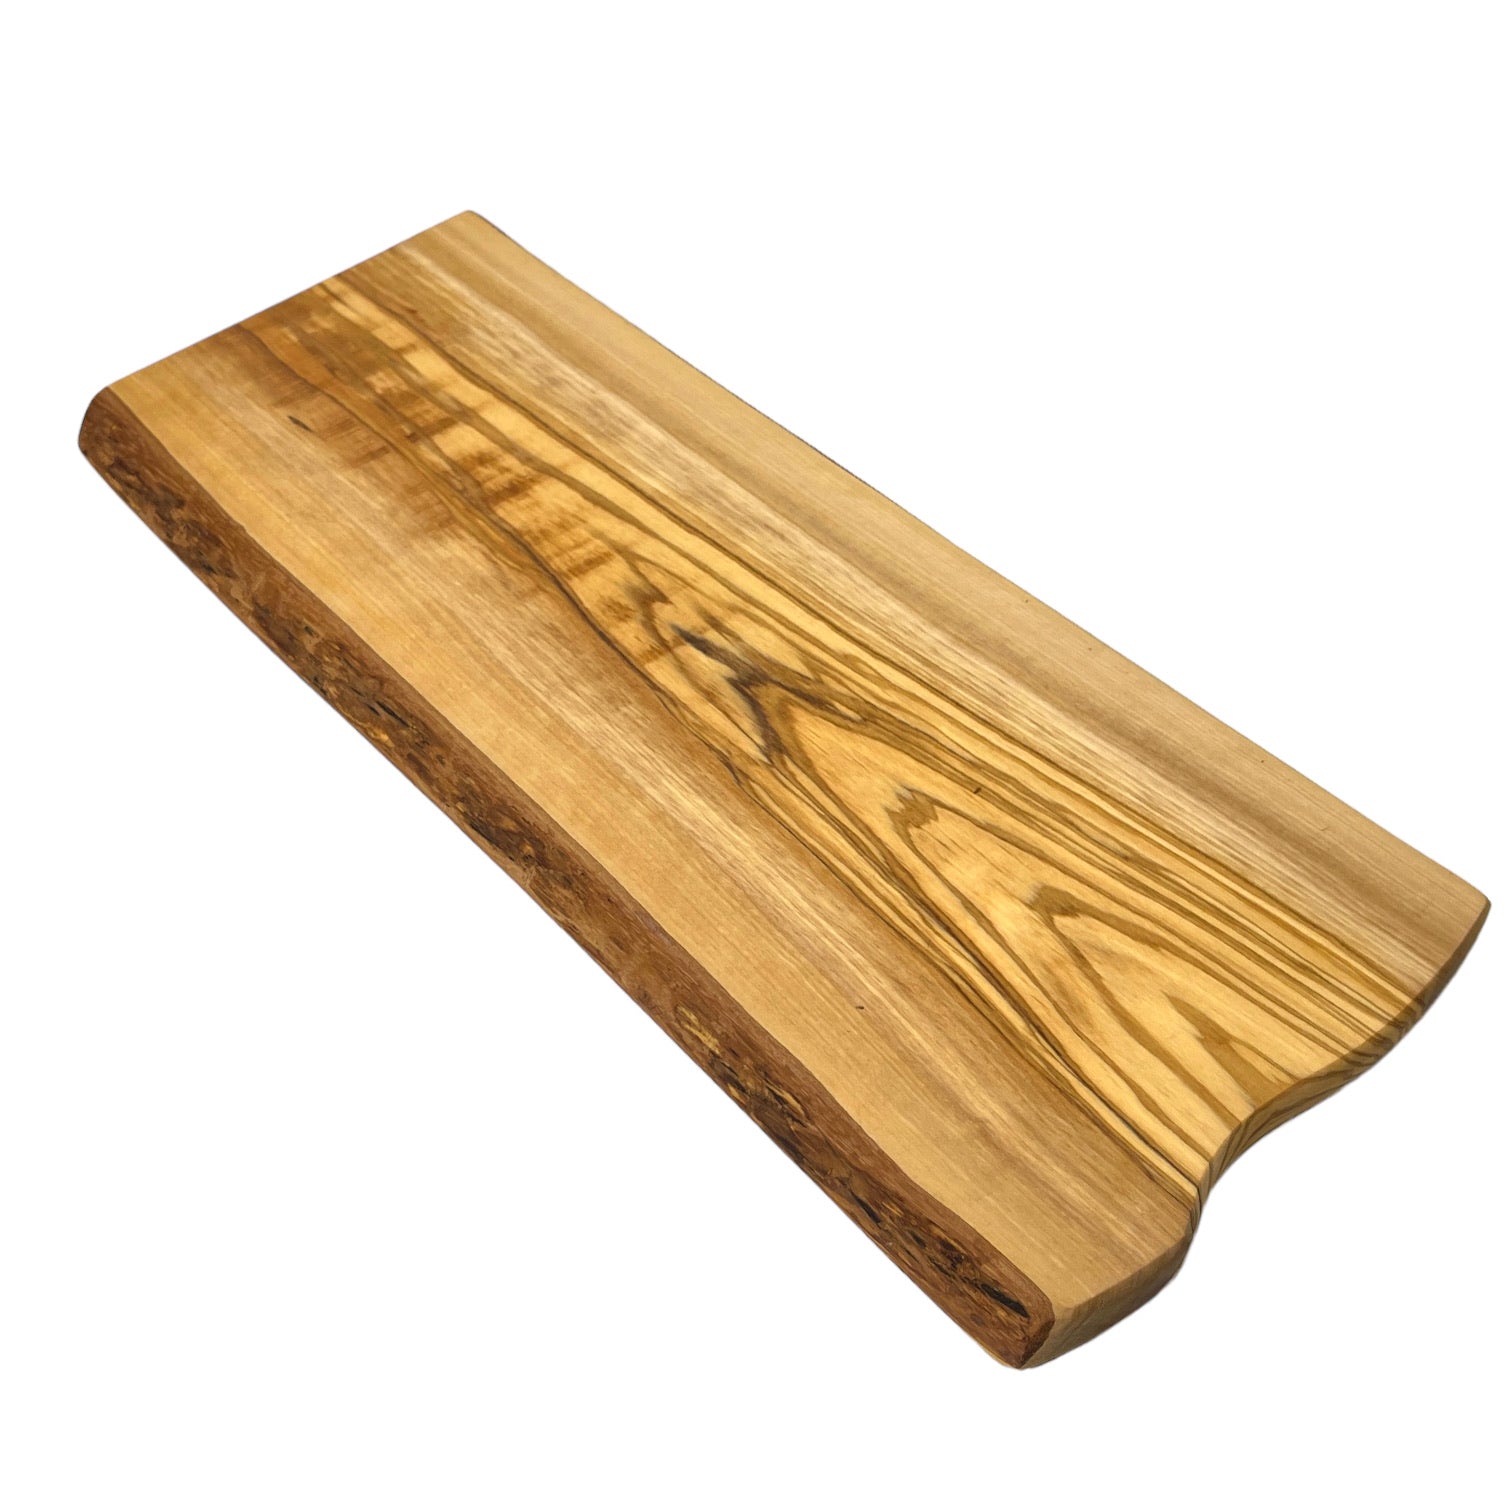 Live-edge Rustic Olive Wood - Handmade Charcuterie Boards - RTS tray top view